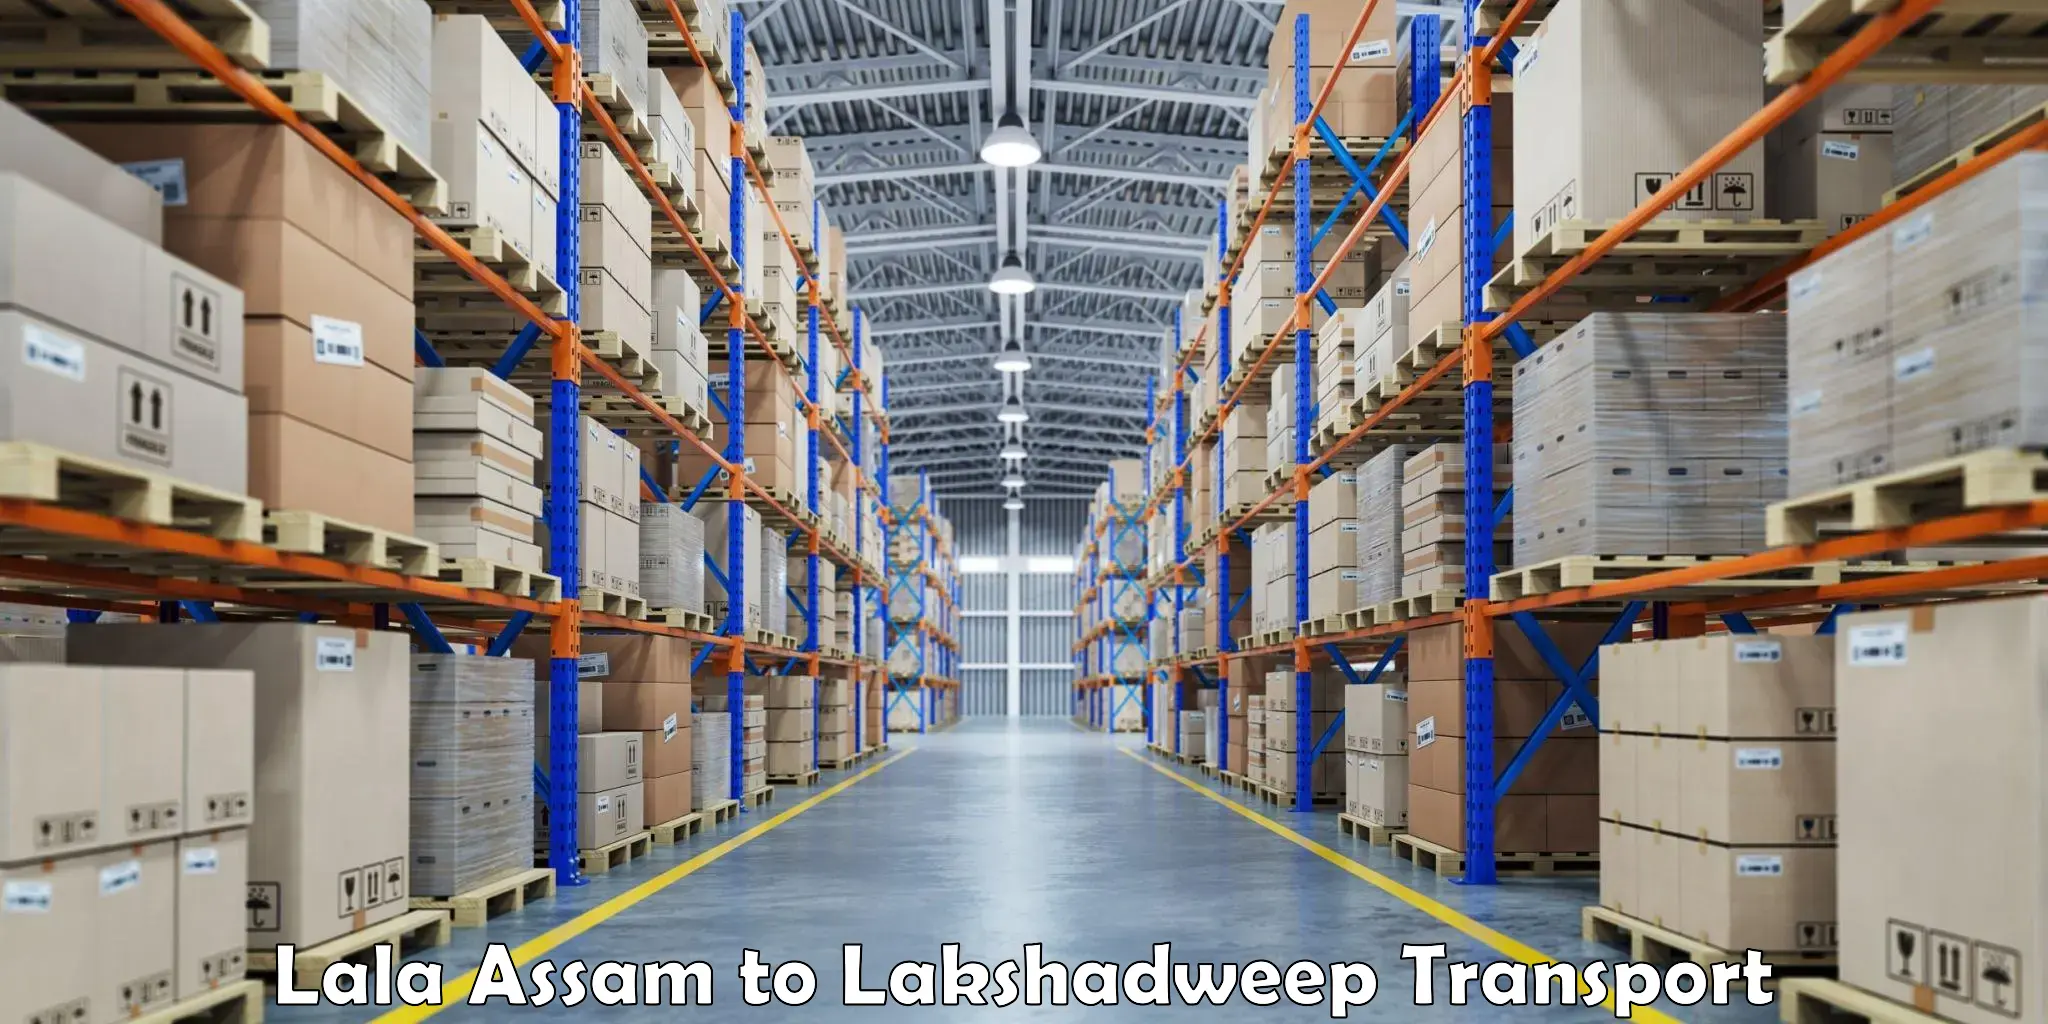 Transport shared services Lala Assam to Lakshadweep